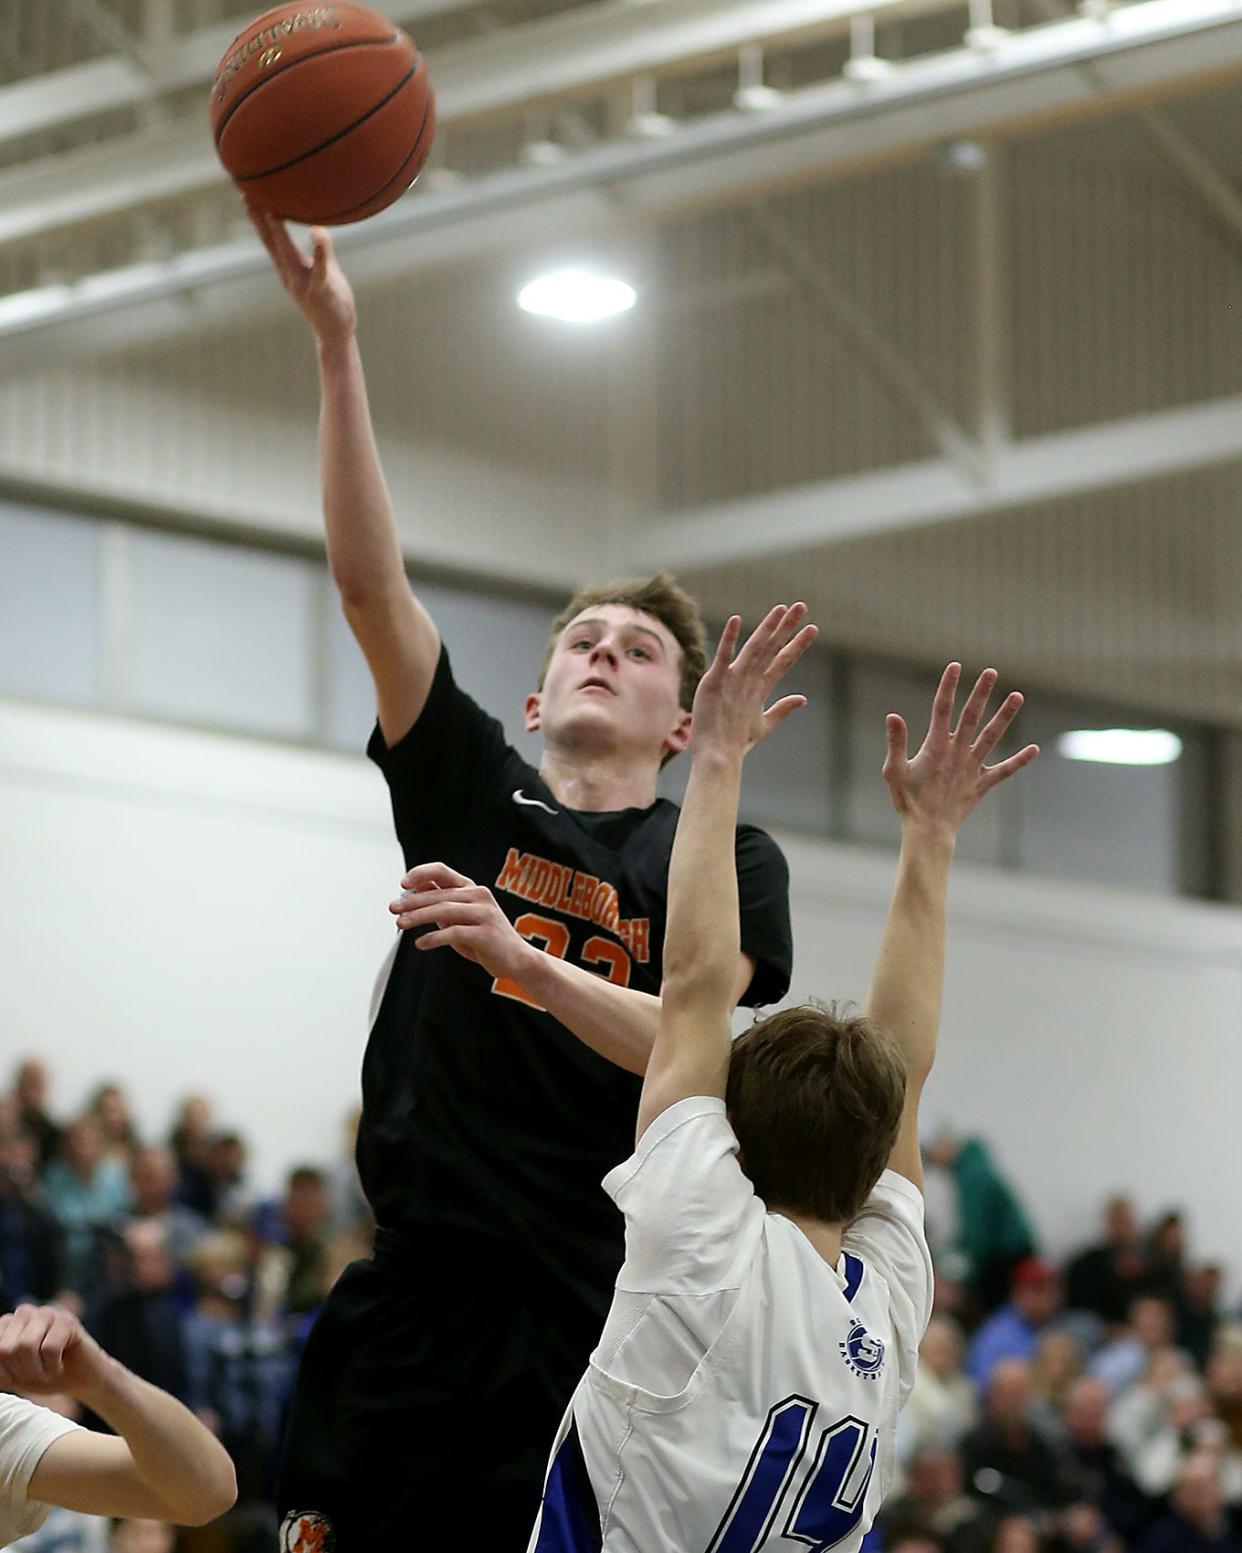 Middleborough's Matt Youngquist goes up for a layup to cut Scitaute’s lead to 21-12 during second quarter action of their game in the Round of 32 game in the Division 2 state tournament at Scituate High on Thursday, March 2, 2023.